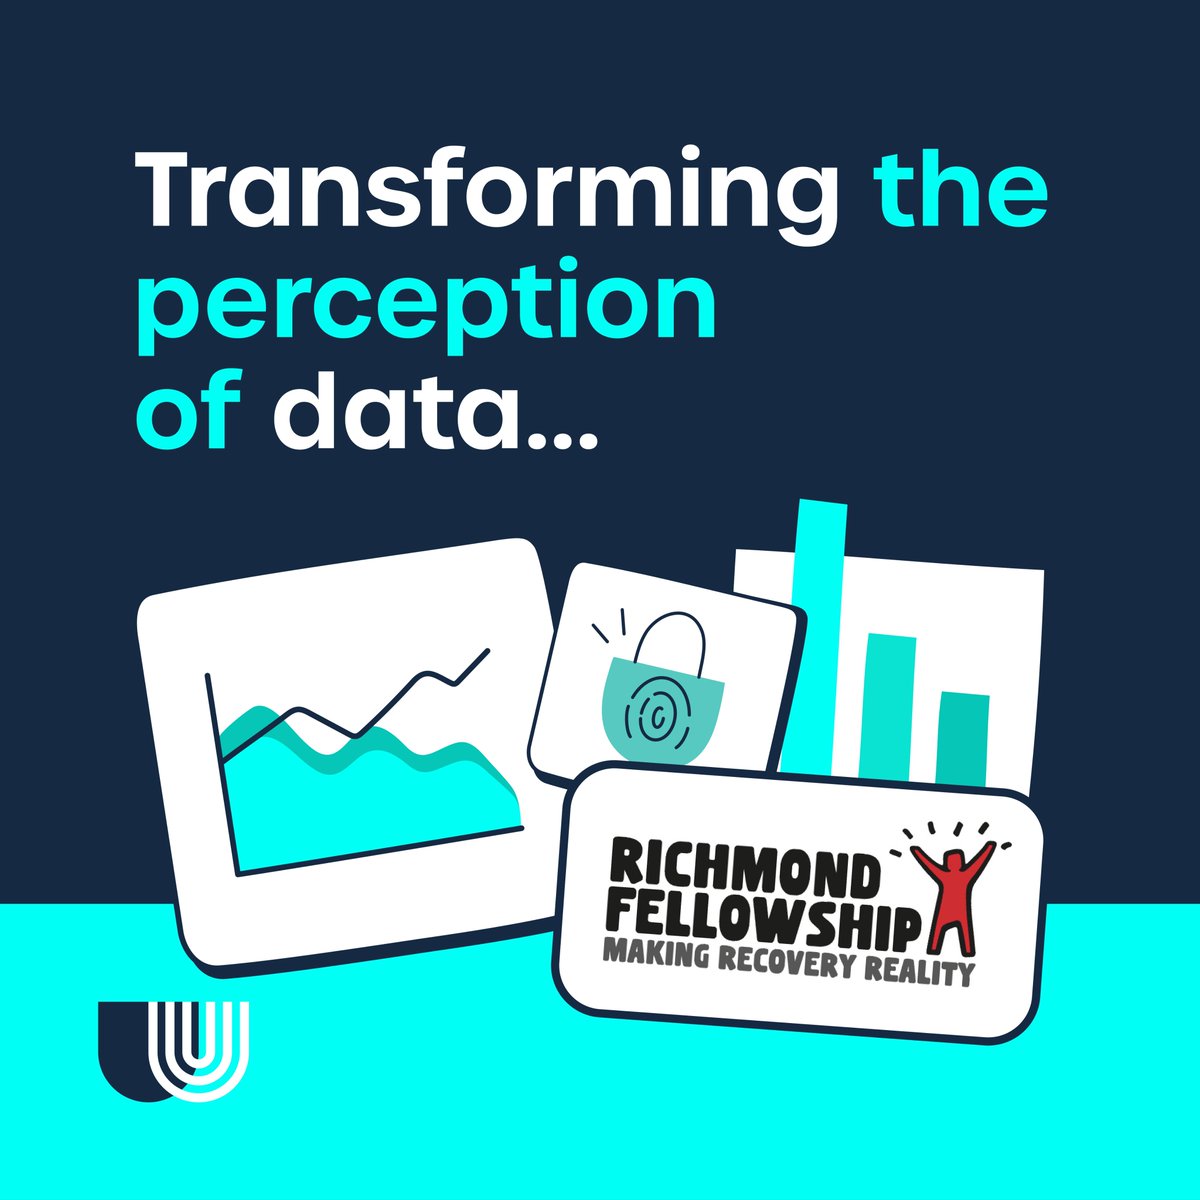 Using Data as a Service meant that Richmond Fellowship didn’t need a big, expensive team to cover all its data needs, but could pick those that would be most useful at the time and supplement their own capabilities.waterstons.com/insights/case-… #Data #ThirdSector #DataAsAService